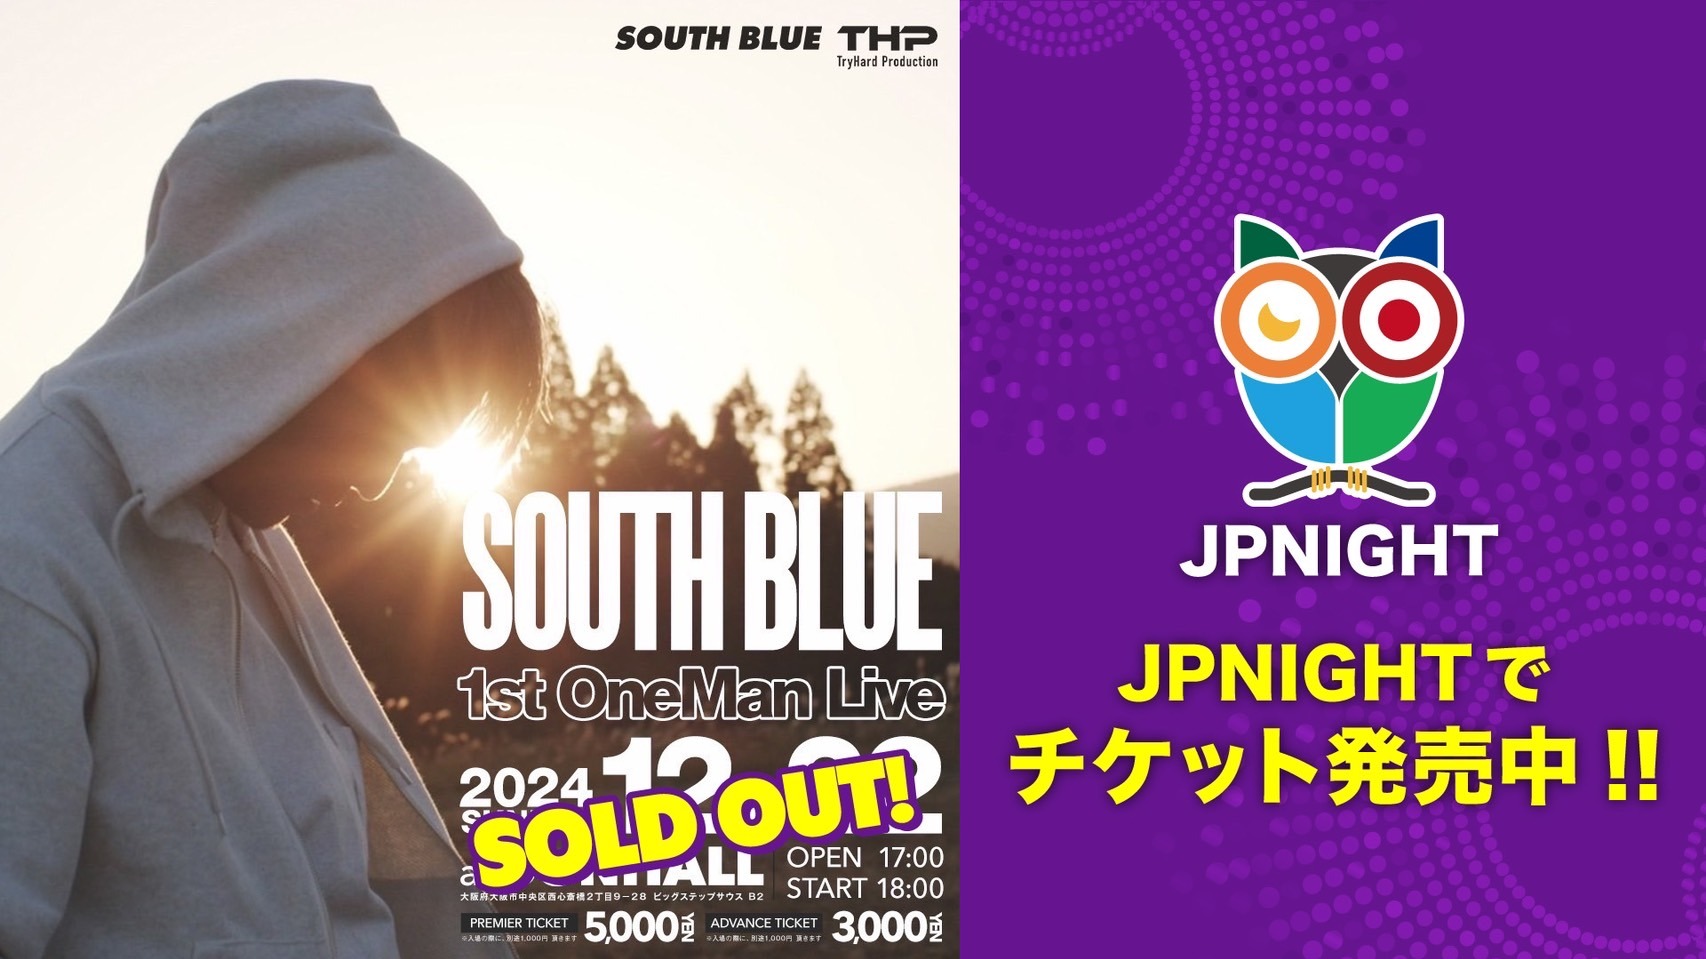 SOUTH BLUE 1st One Man Live 前売りチケット完売！！